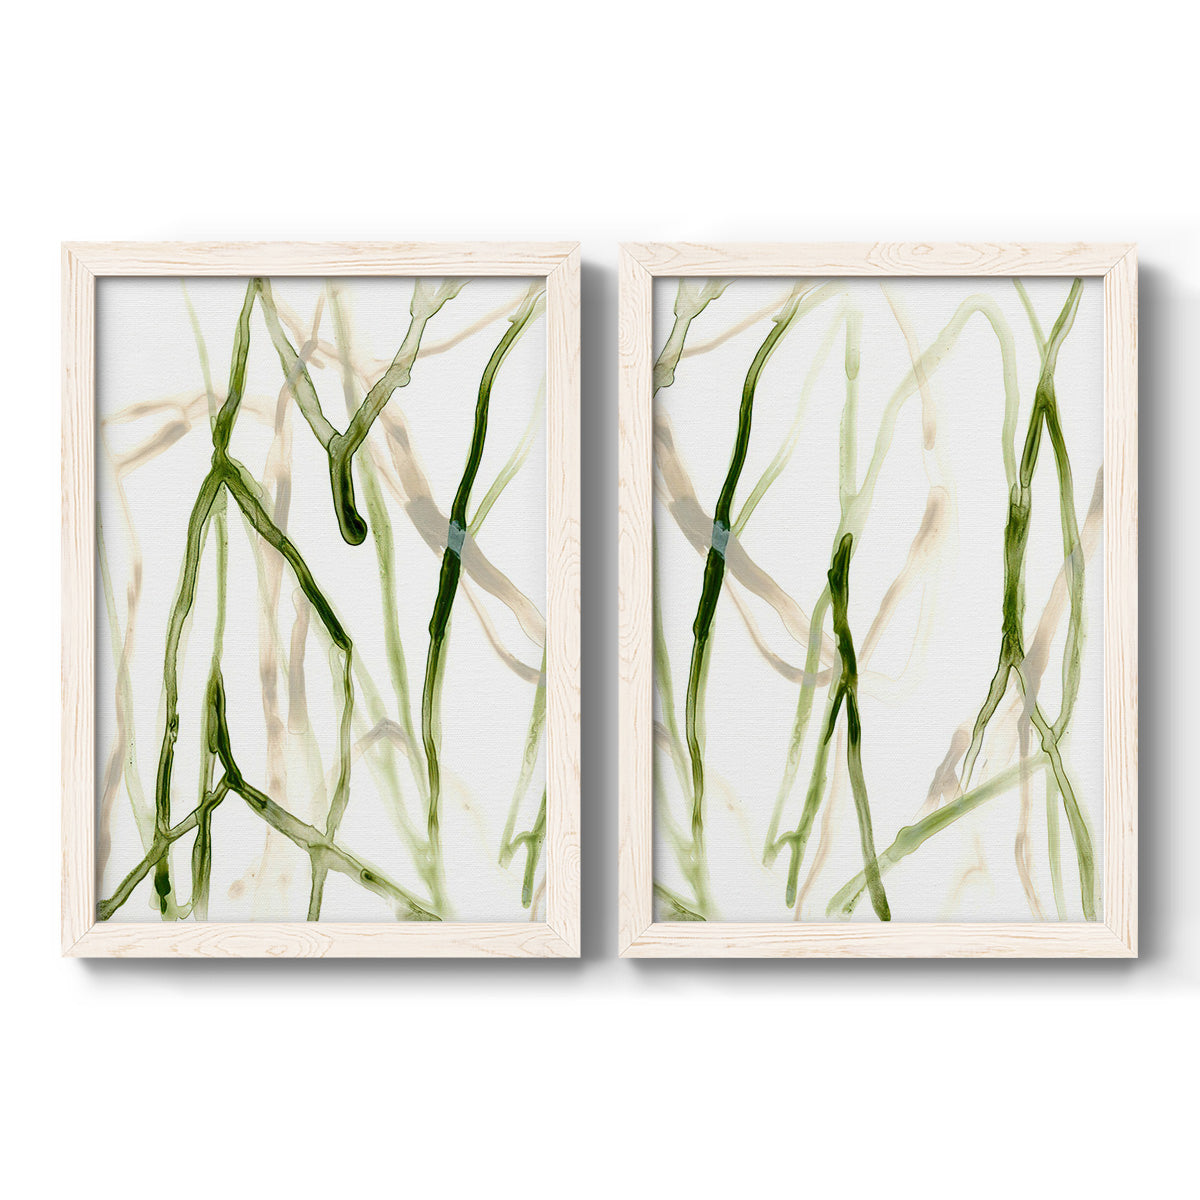 Runnel VII - Premium Framed Canvas 2 Piece Set - Ready to Hang